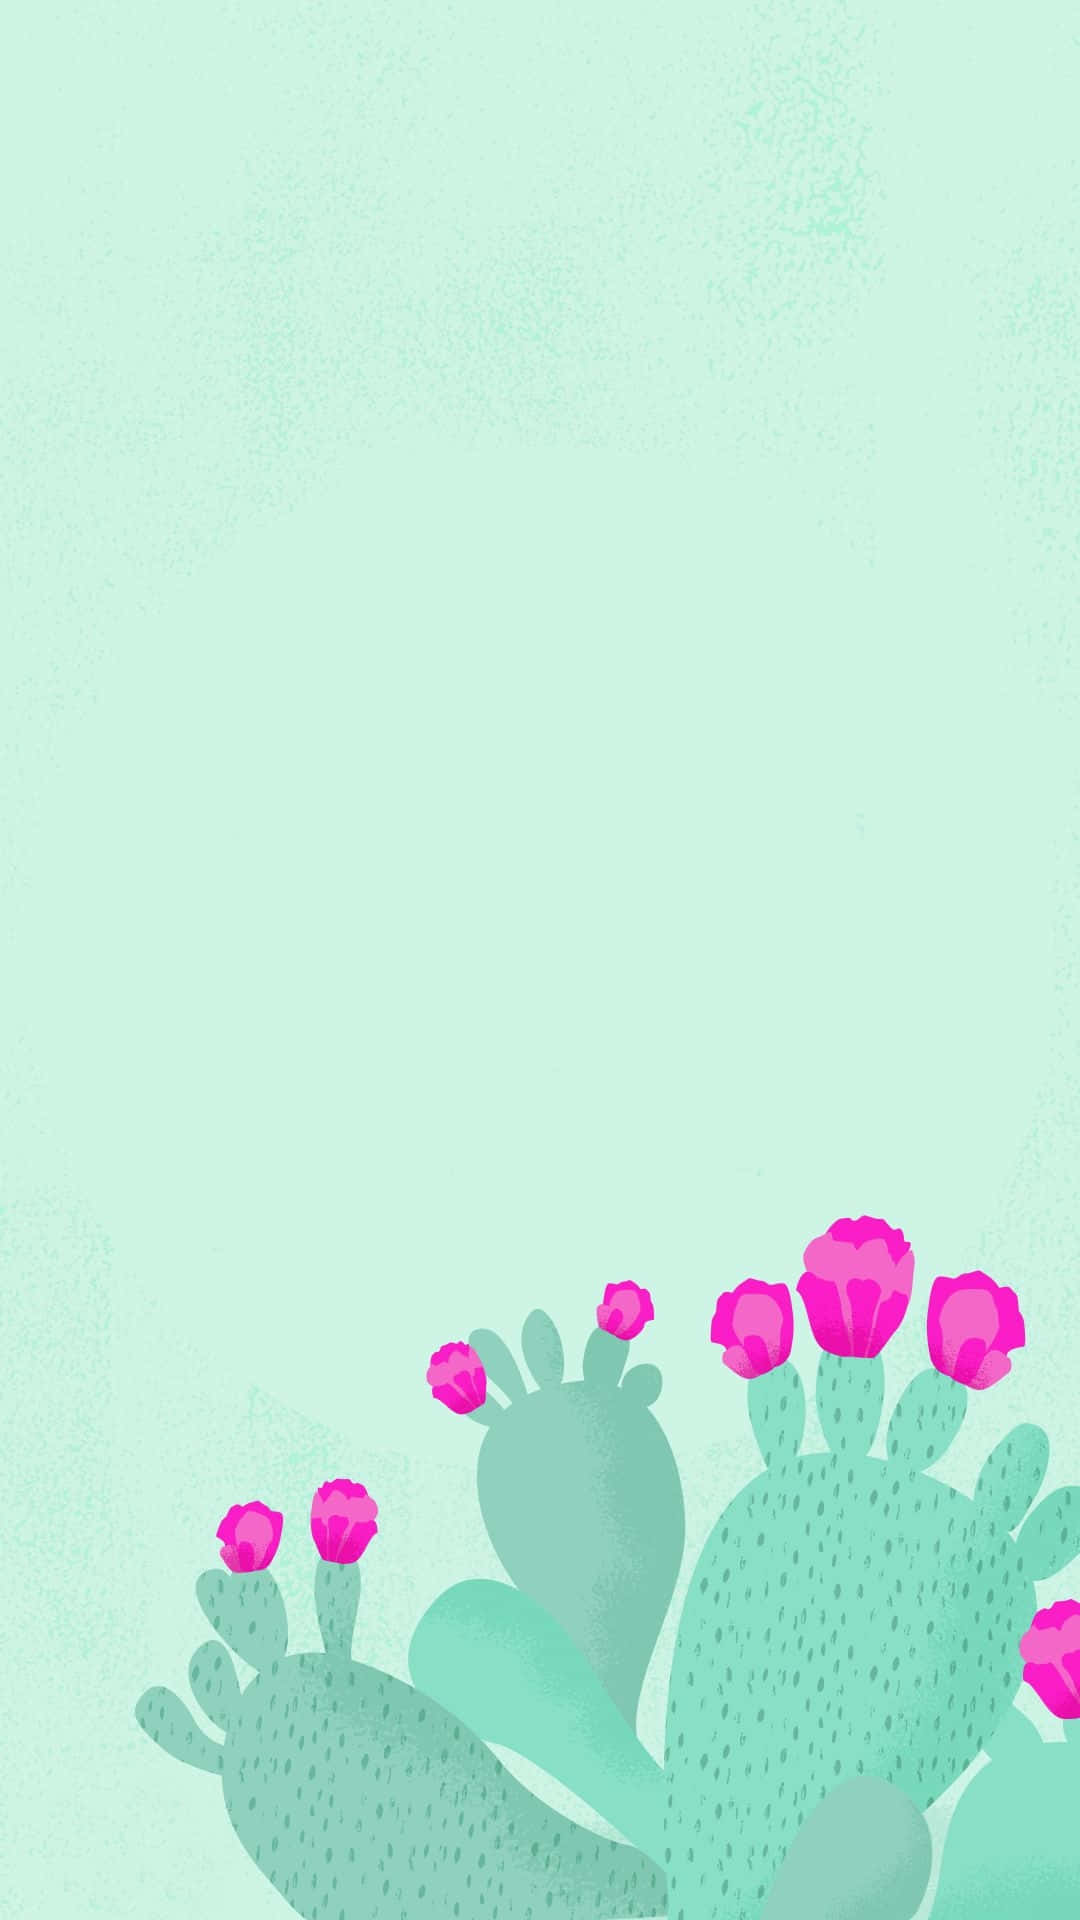 A Cactus Plant With Pink Flowers On A Green Background Wallpaper